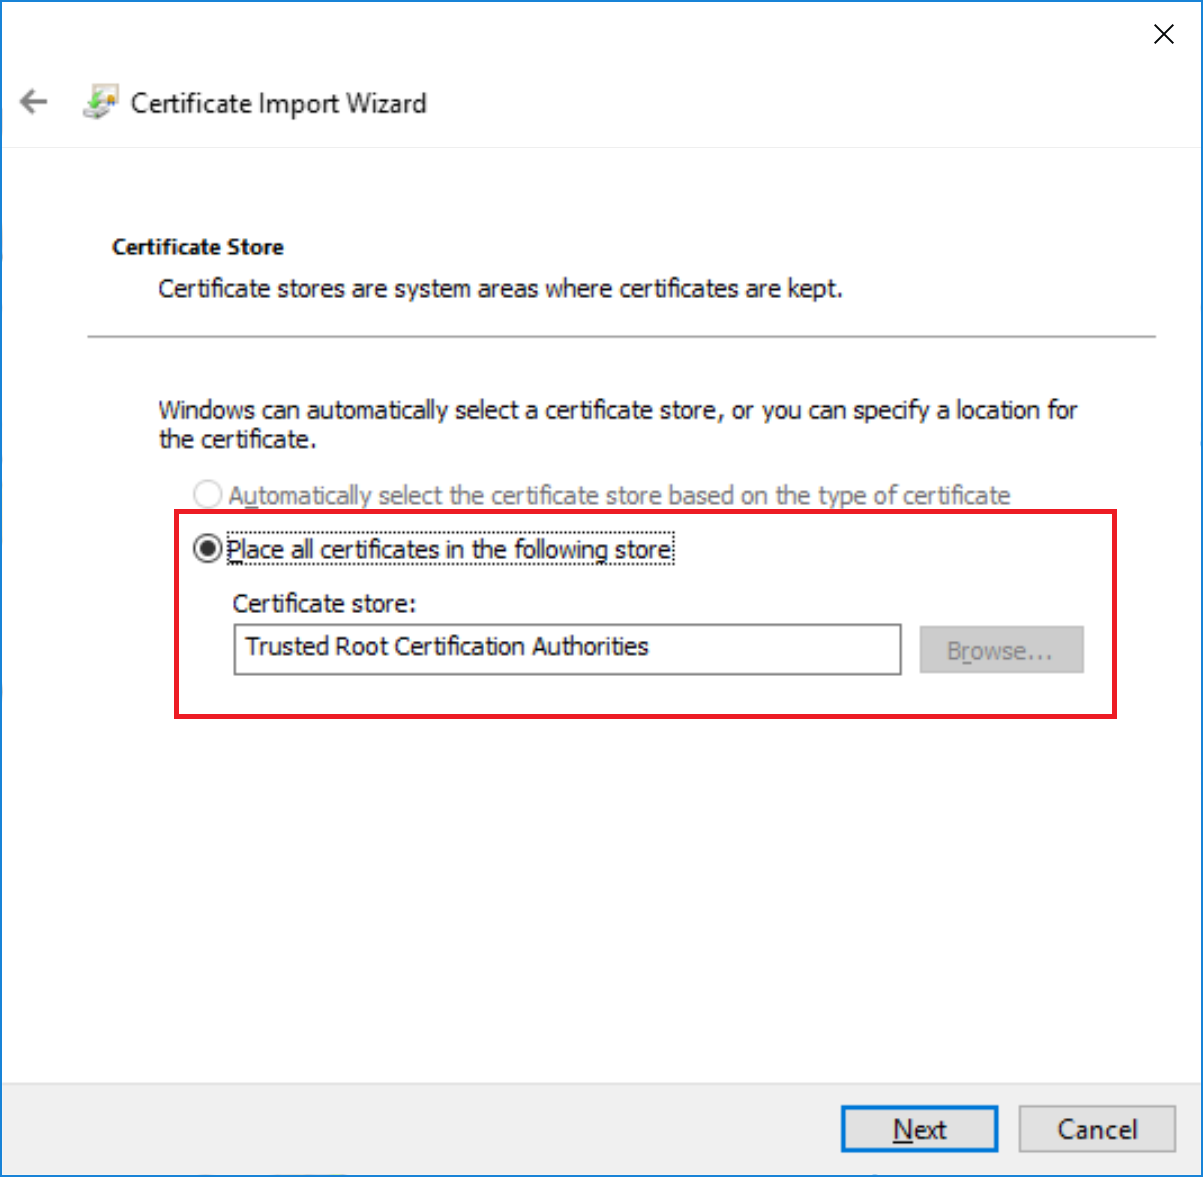 ../../_images/certificate_import_wizard_step3.png